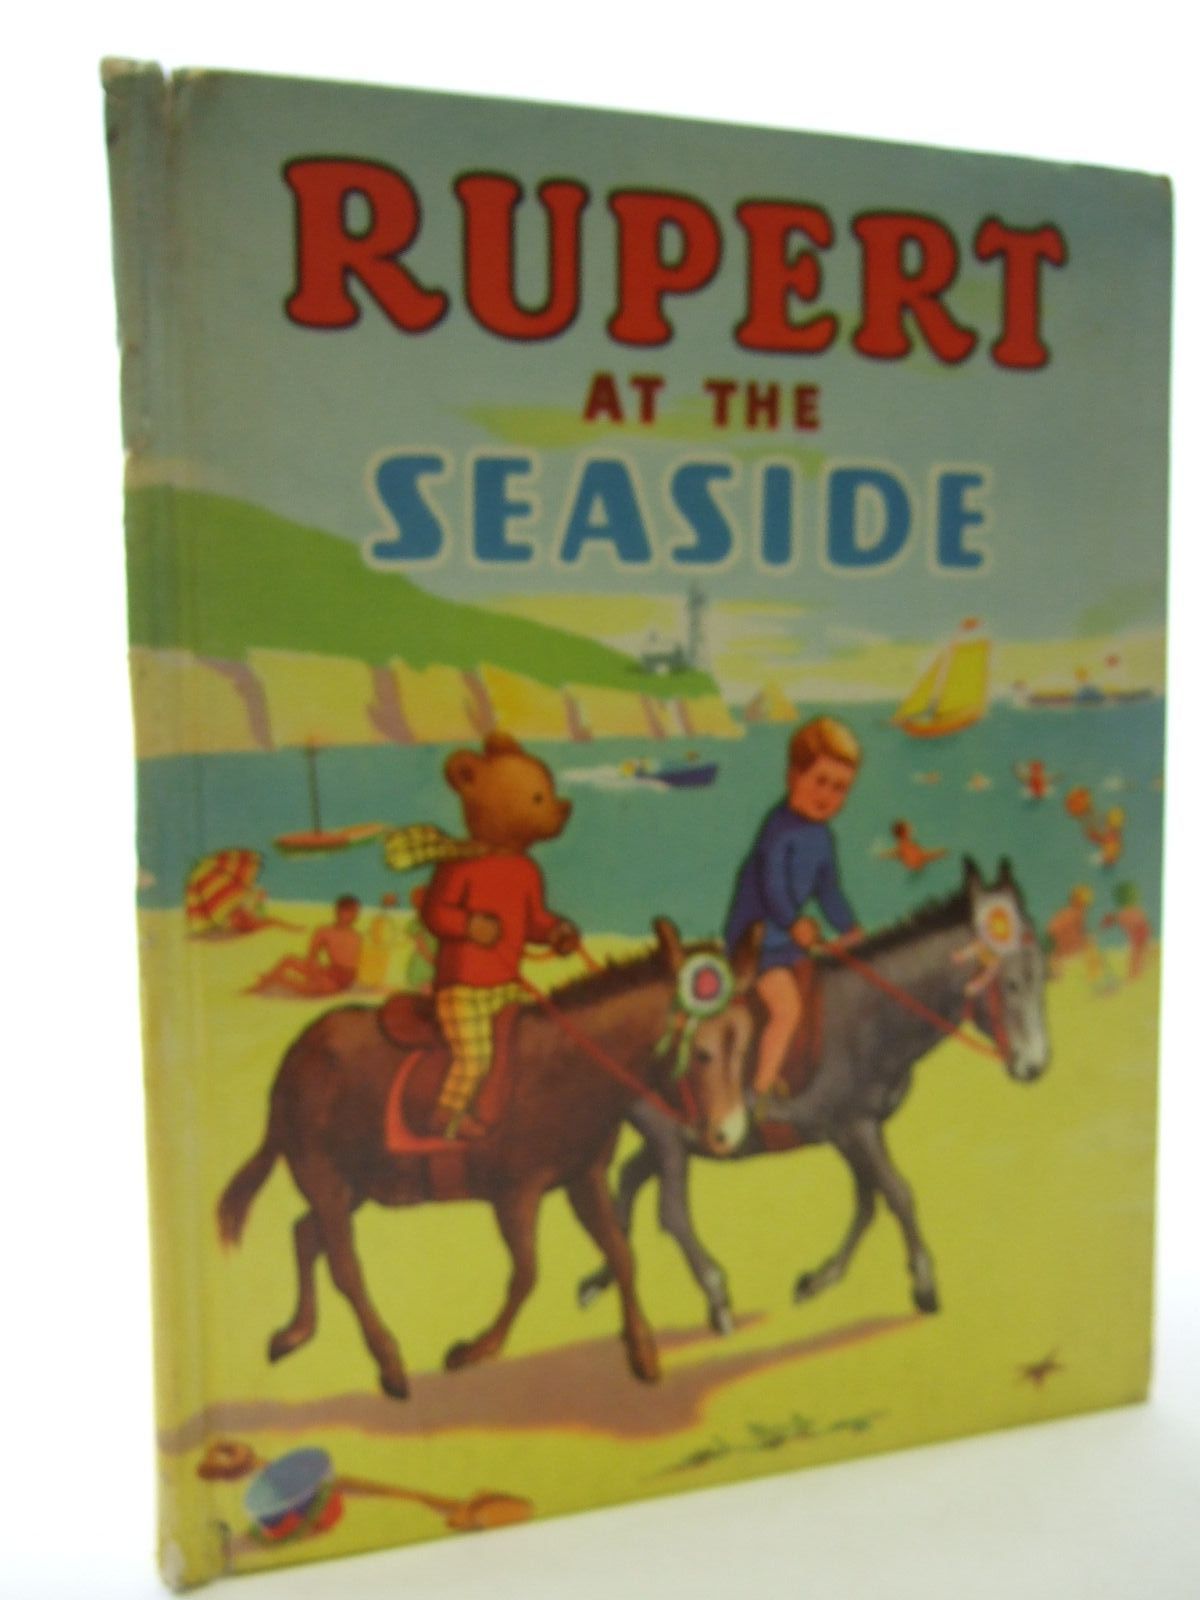 Photo of RUPERT AT THE SEASIDE published by L.T.A Robinson (STOCK CODE: 2106959)  for sale by Stella & Rose's Books